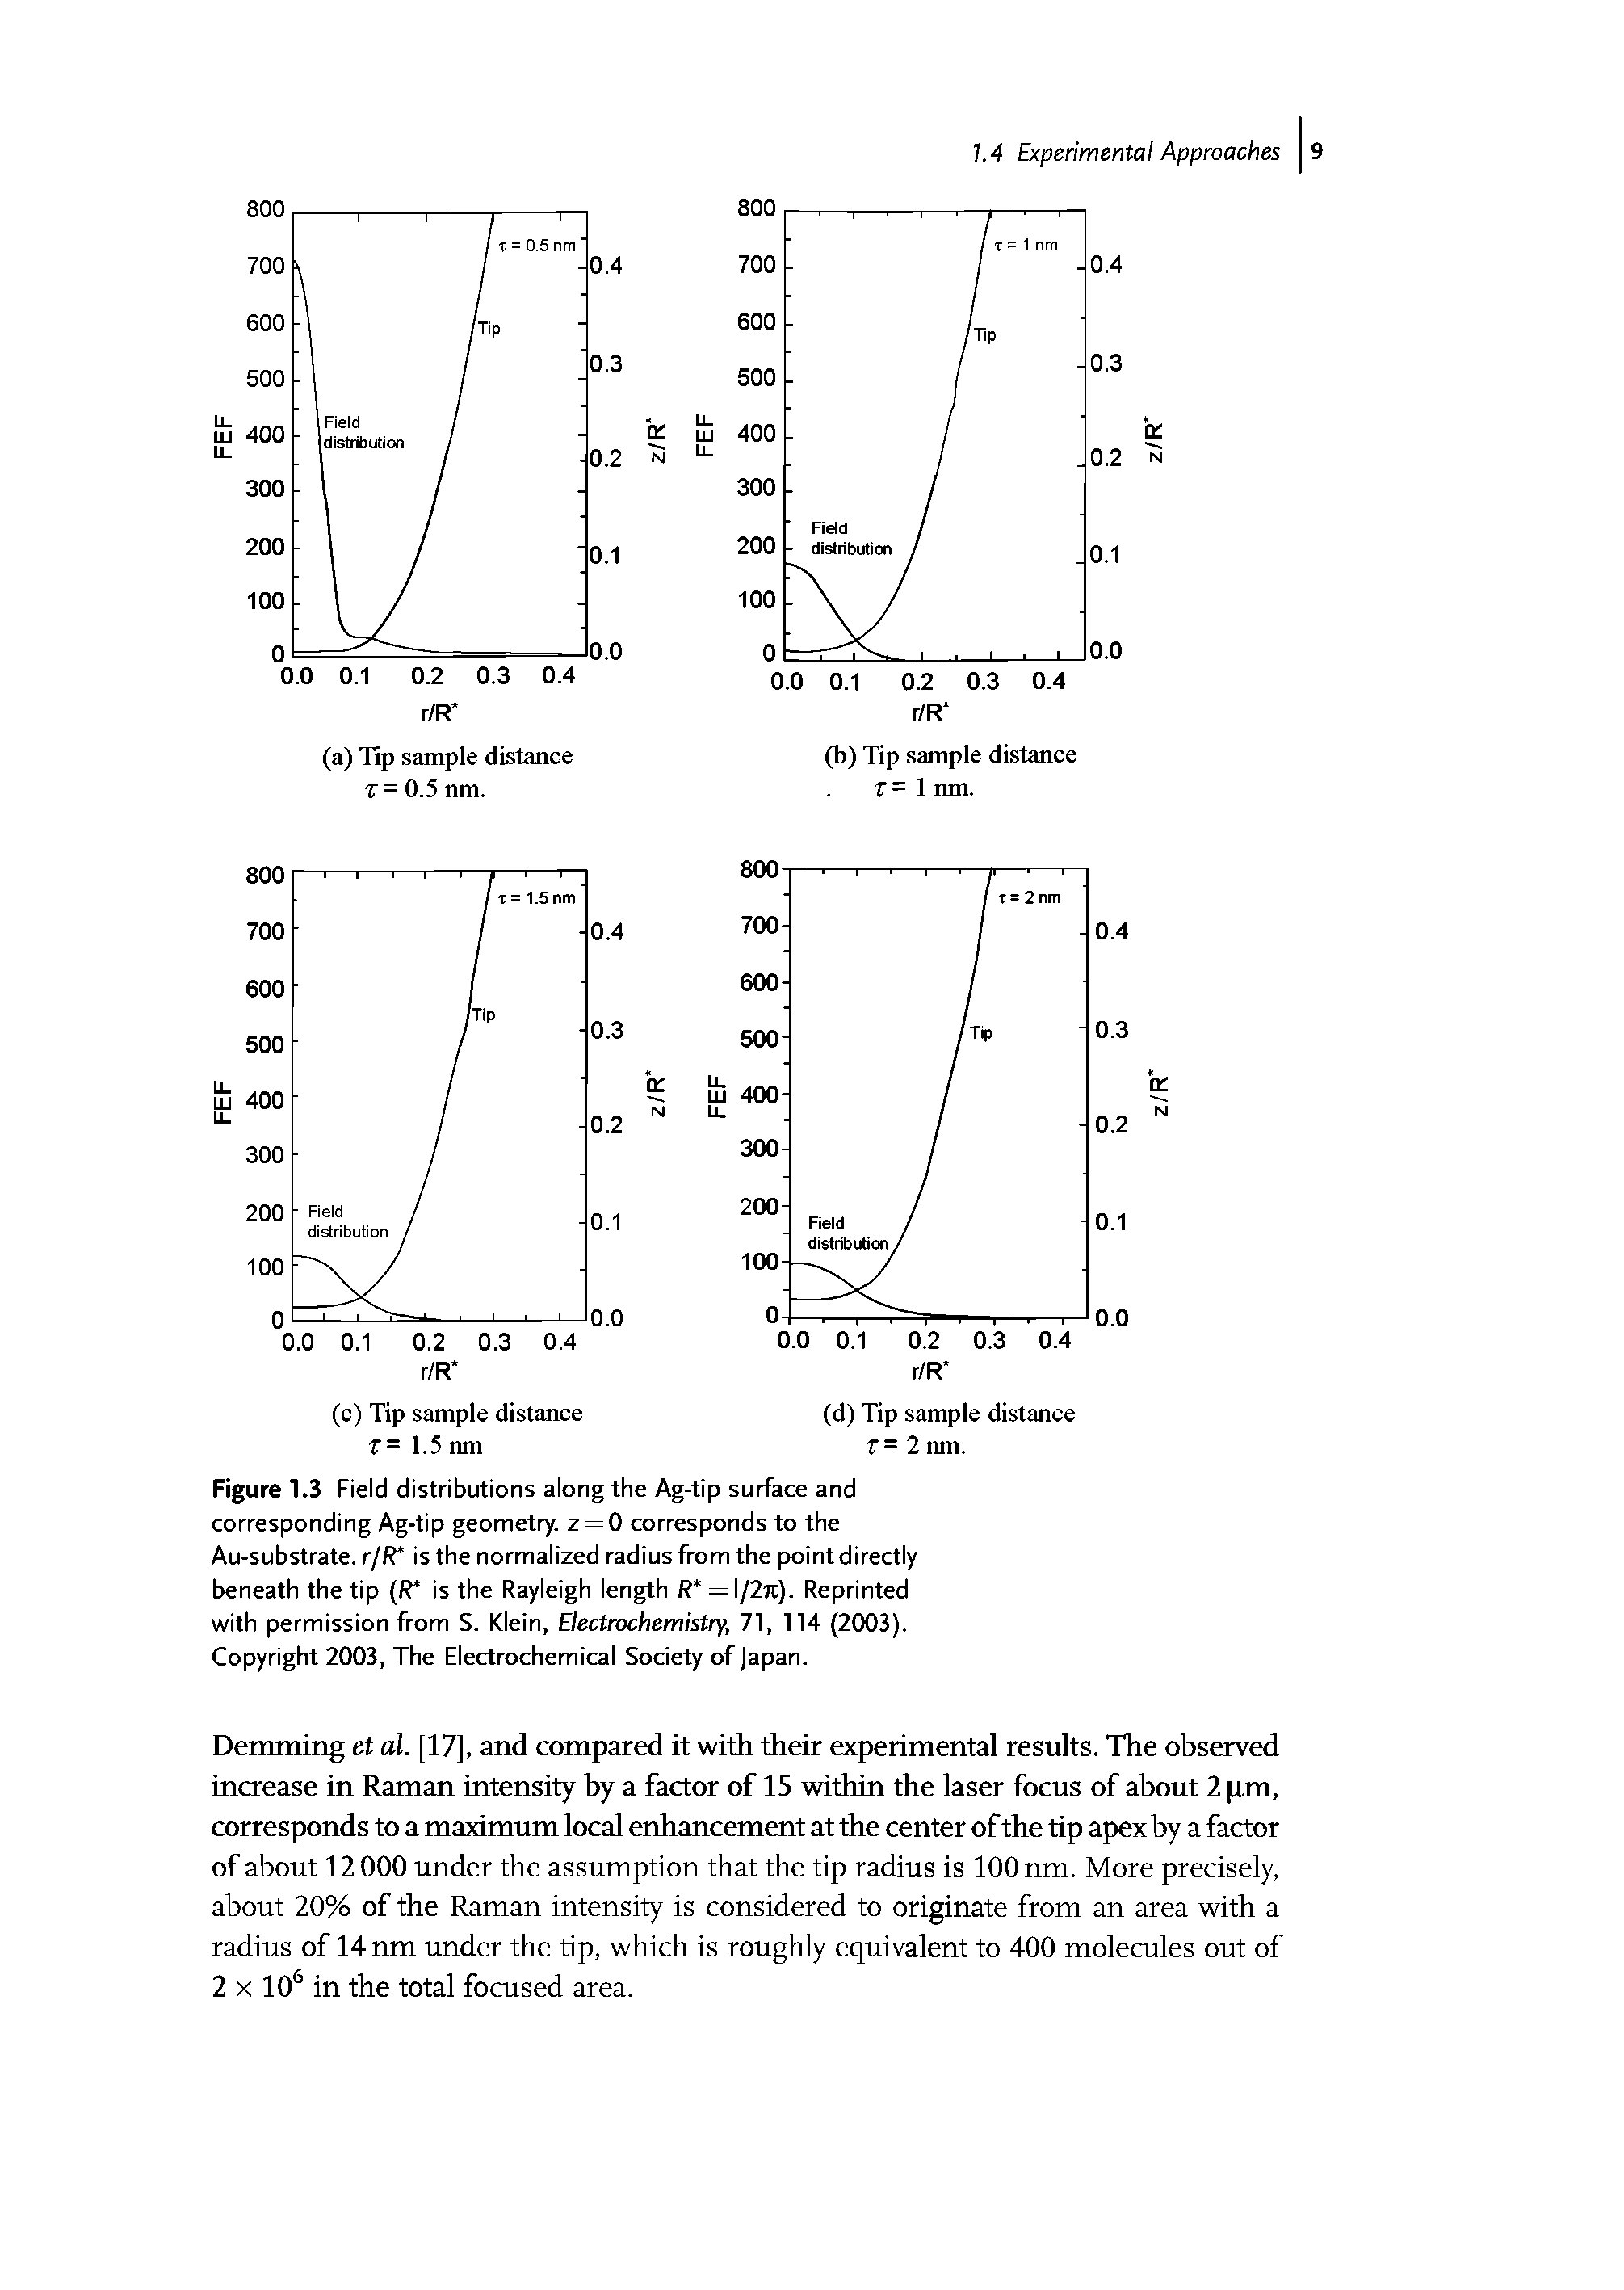 Figure 1.3 Field distributions along the Ag-tip surface and corresponding Ag-tip geometry. z = 0 corresponds to the Au-substrate. r/R is the normalized radius from the pointdirectly beneath the tip (R is the Rayleigh length R = /2n). Reprinted with permission from S. Klein, Electrochemistry, 71, 114 (2003). Copyright 2003, The Electrochemical Society of Japan.